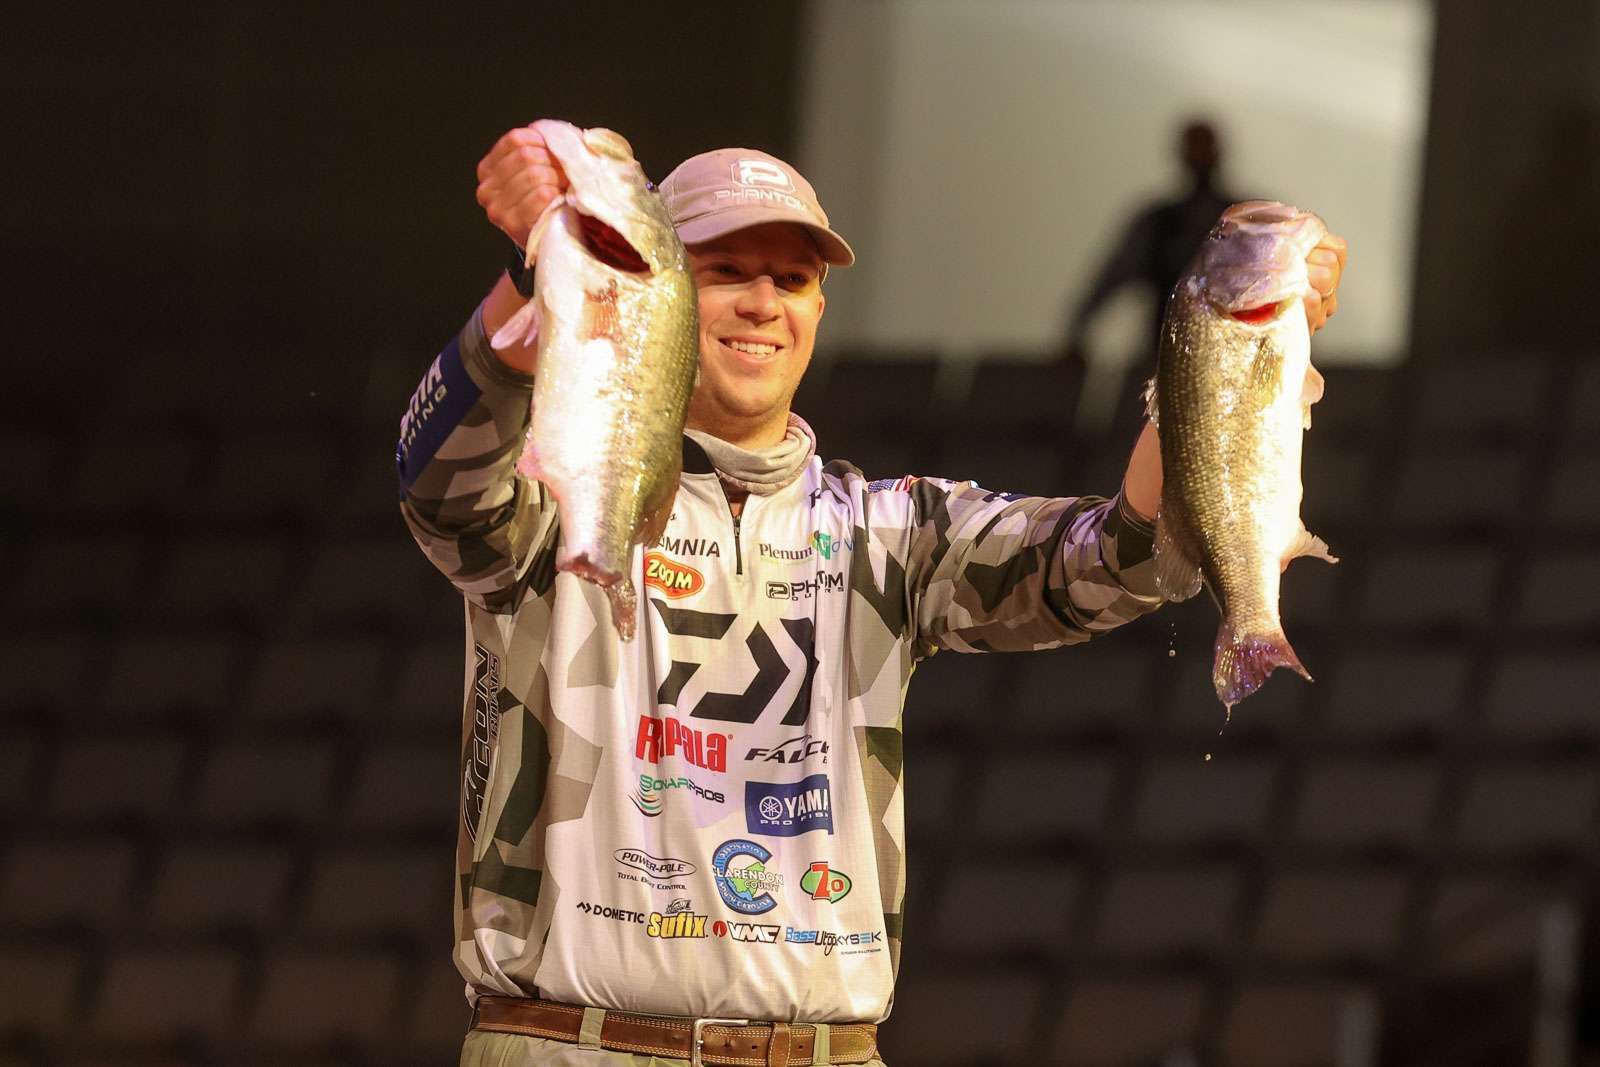 Patrick Walters continued to excel in Texas. He earned Century Belts, along with a victory, the past two years on Lake Fork, which has similarities to Ray Roberts. With 22-7, Walters started in second place. His biggest fish on BassTrakk was a 5-0, about the same weight he was low on the unofficial scoring system that requires anglers to give Marshals estimates of each fish. 